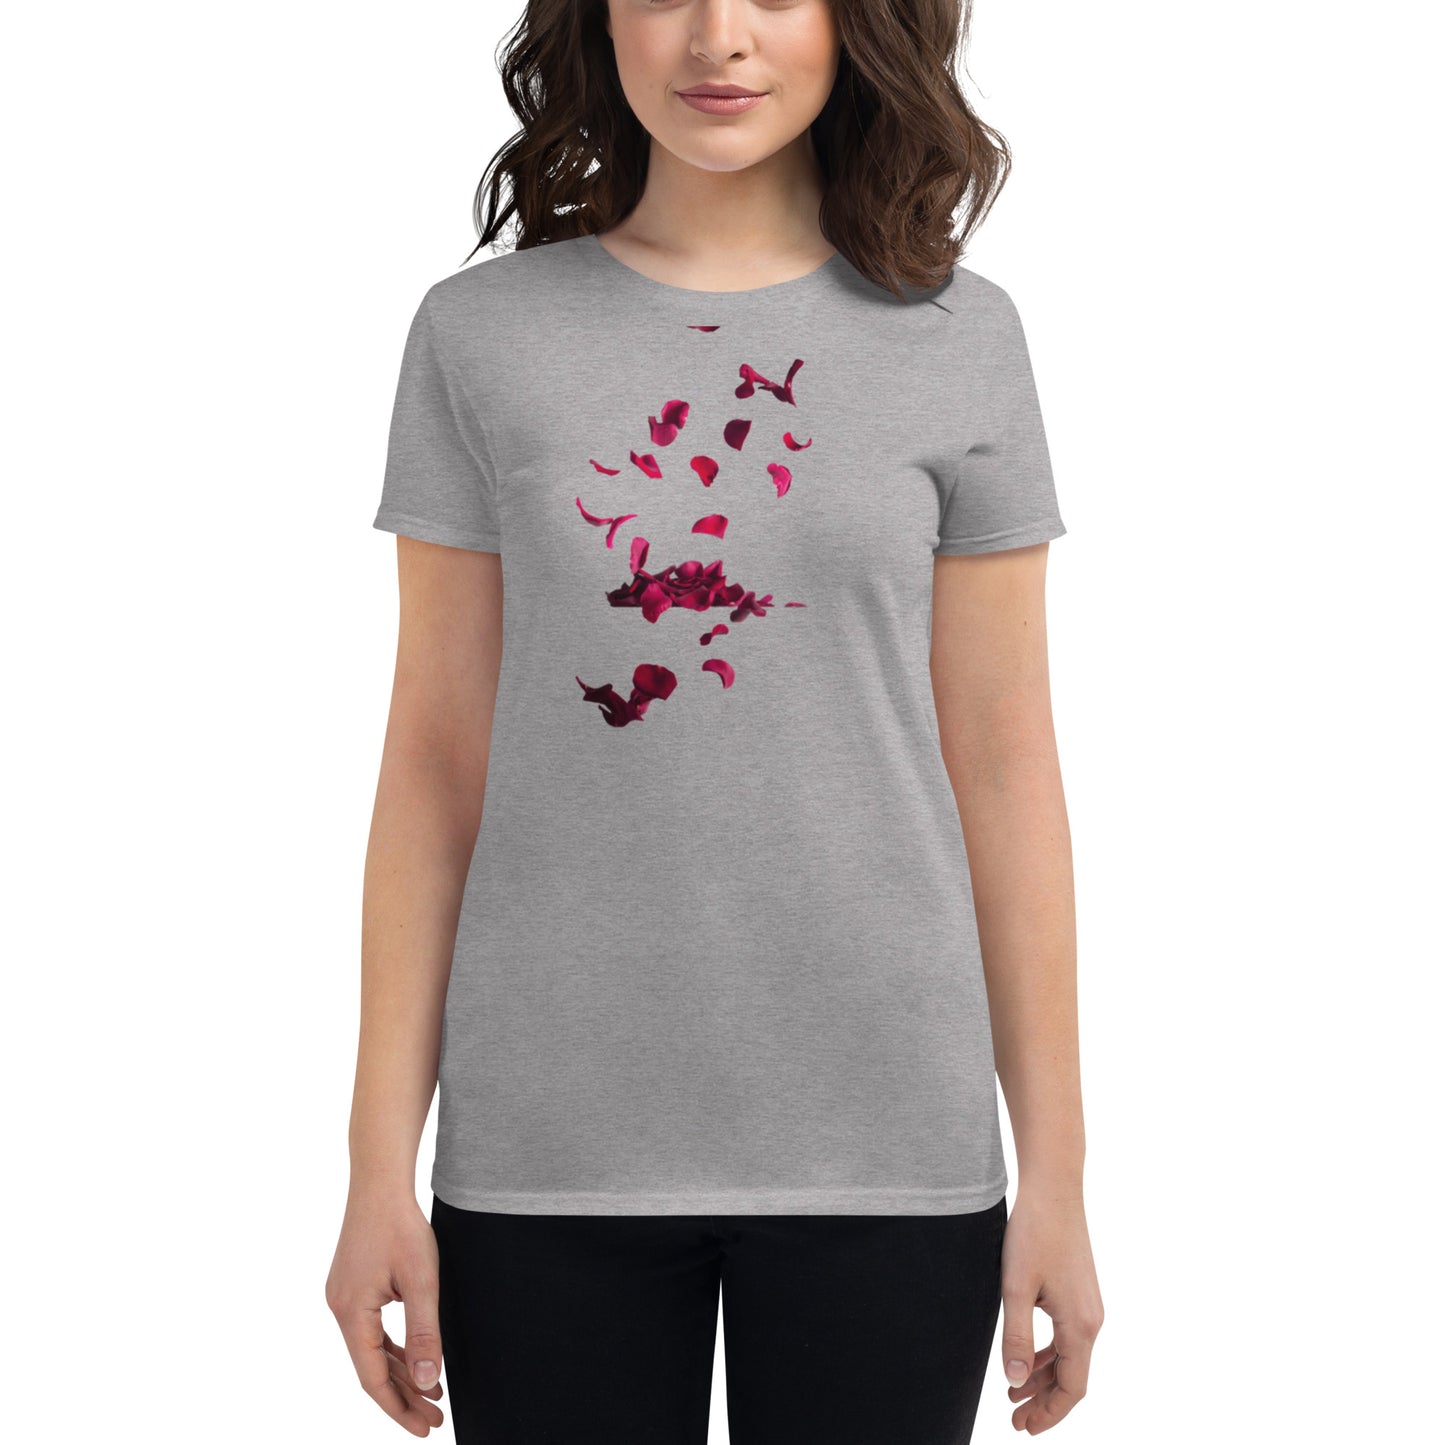 Exquisite Flower-Printed Short Sleeve T-Shirt for Women | Pure Cotton and Blended Varieties